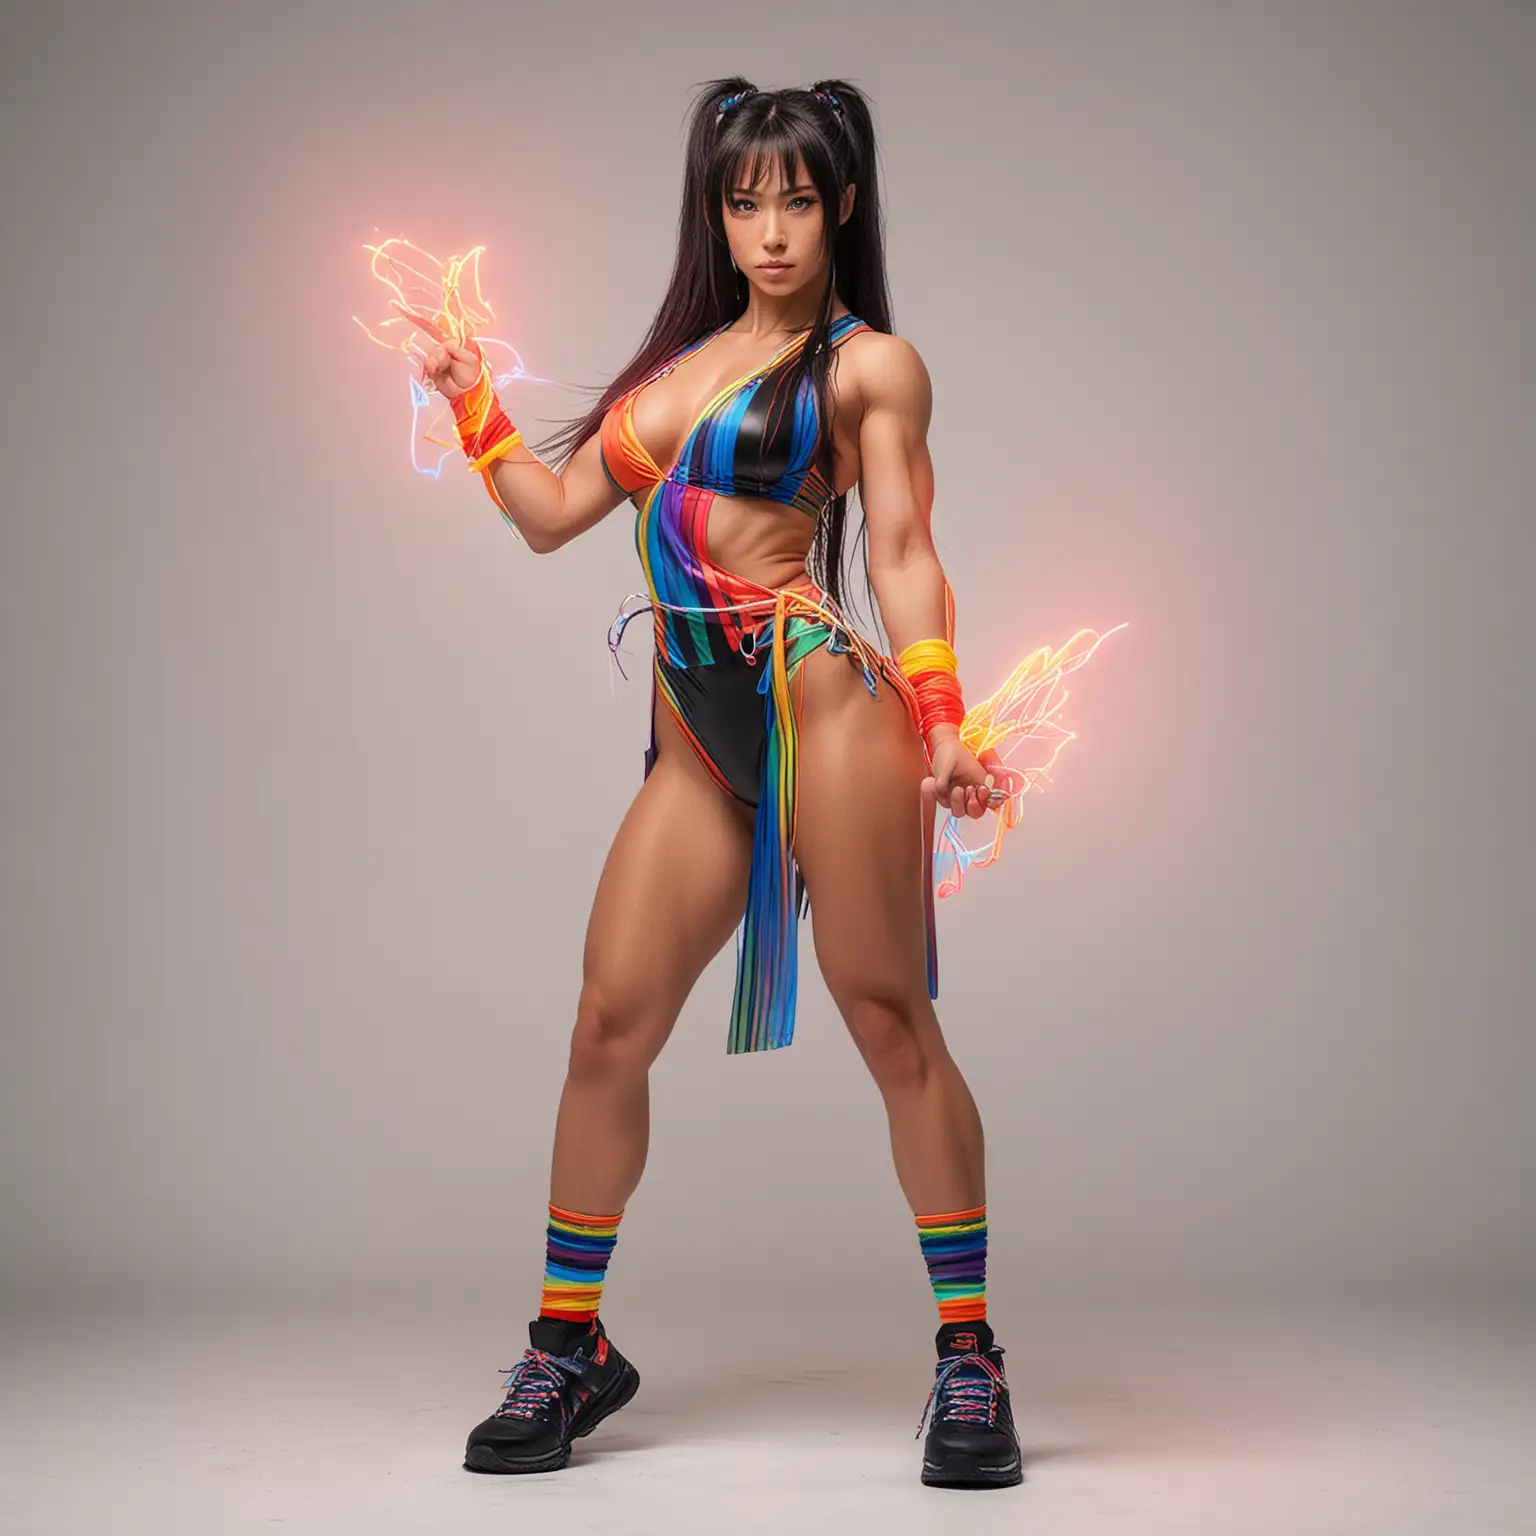 Confident Female Japanese Bodybuilder in Neon Sneakers and Rainbow Robe